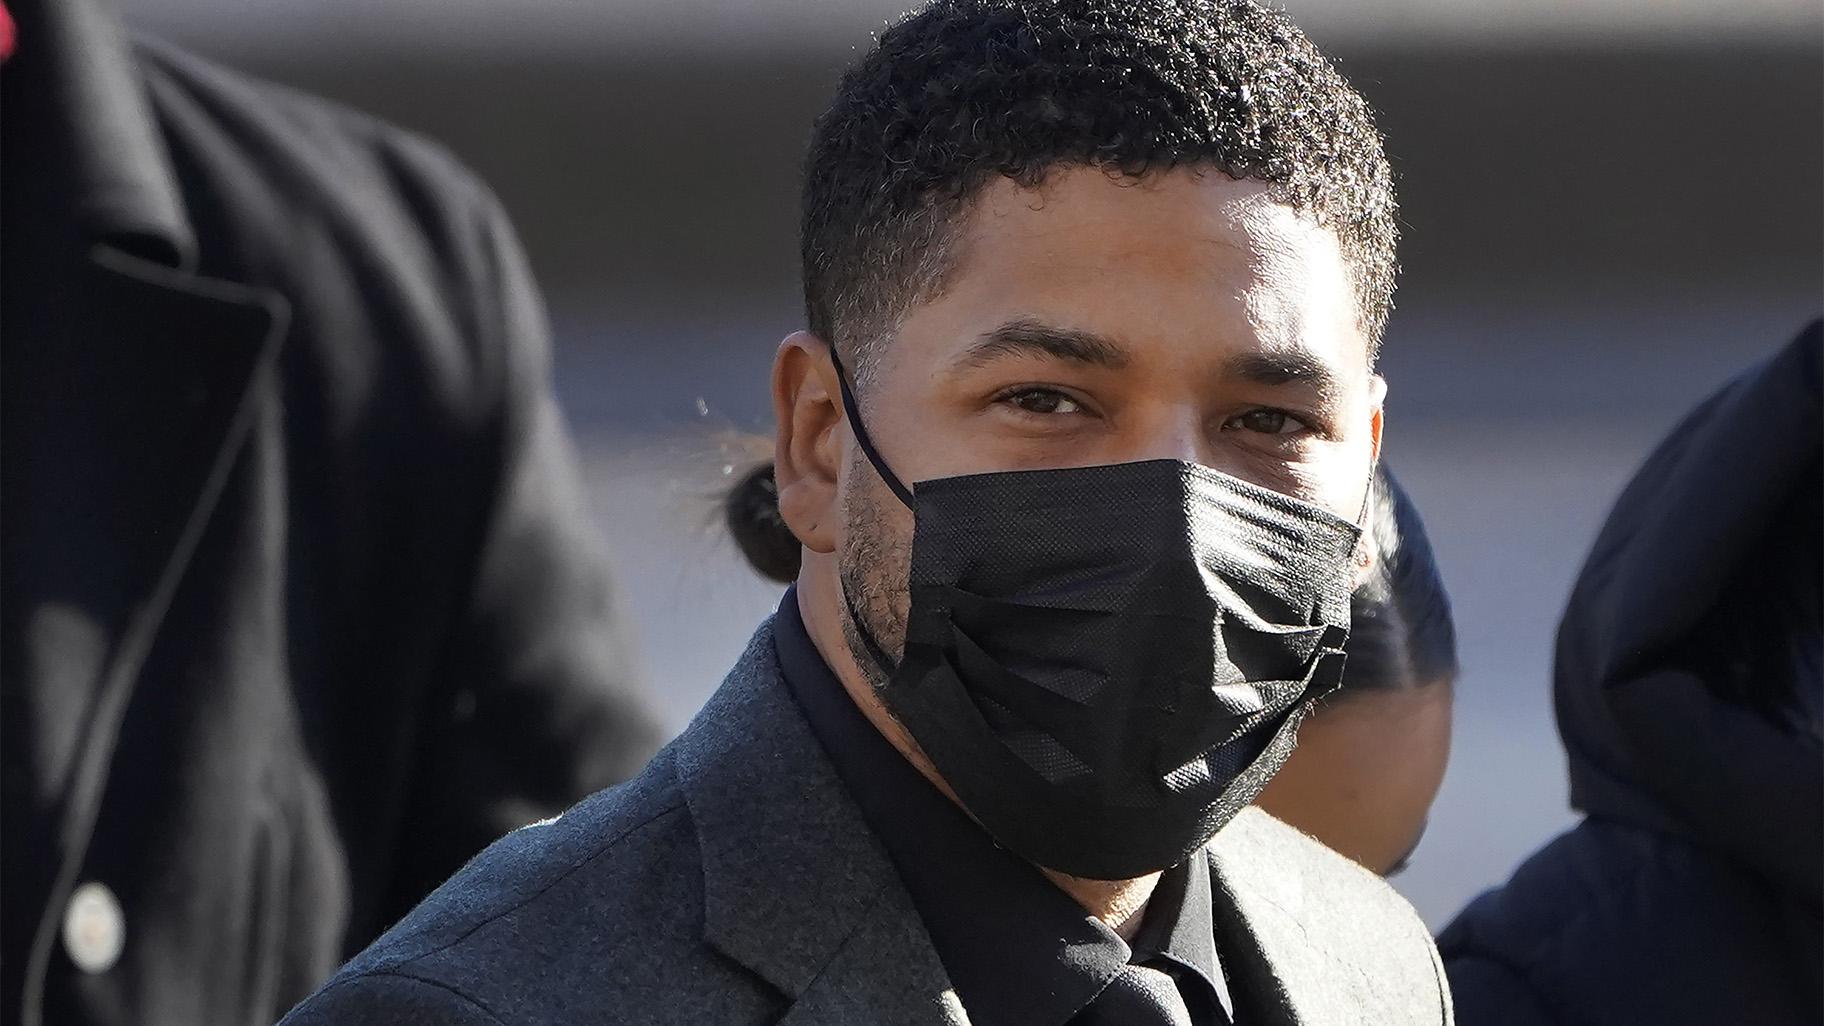 Actor Jussie Smollett arrives Tuesday, Nov. 30, 2021, at the Leighton Criminal Courthouse for day two of his trial in Chicago. After two brothers spent hours telling a jury how Smollett paid them to carry out a fake racist and anti-gay attack on himself, the big question when the trial resumes Monday, Dec. 6, is whether the actor will tell his side. (AP Photo / Charles Rex Arbogast, File)